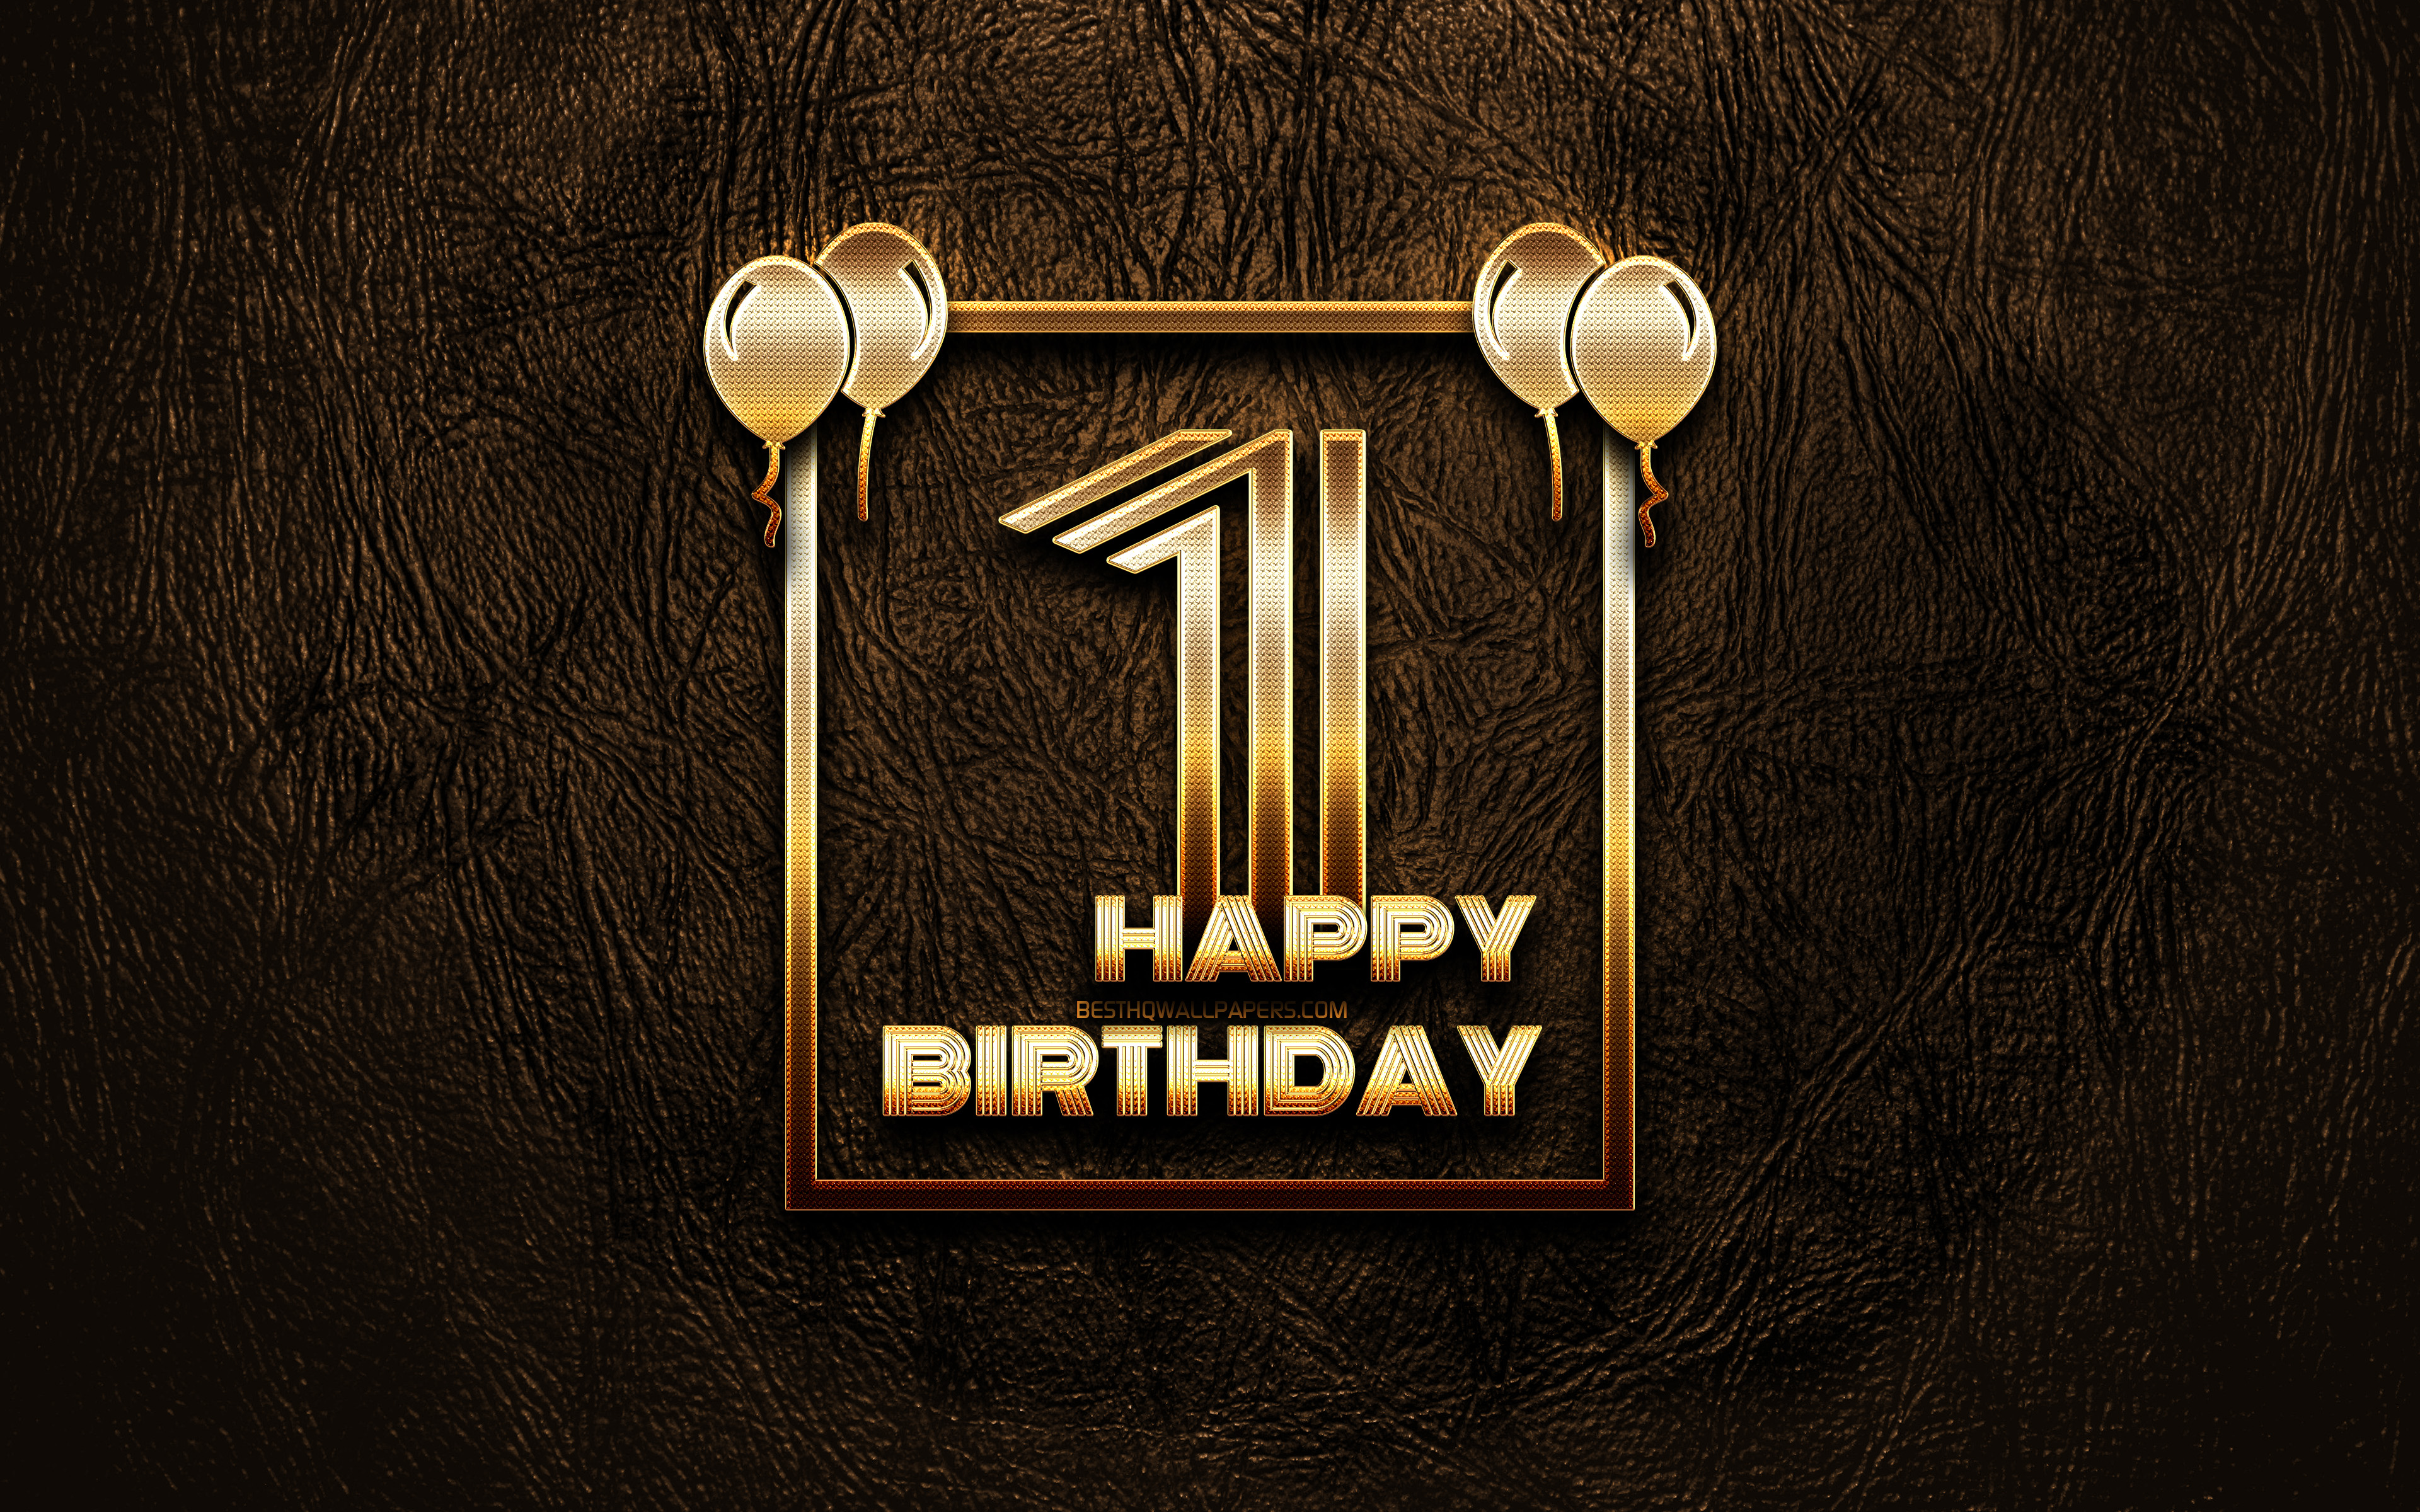 Download wallpaper Happy 1st birthday, golden frames, 4K, golden glitter signs, Happy 1 Years Birthday, 1st Birthday Party, brown leather background, 1st Happy Birthday, Birthday concept, 1st Birthday for desktop with resolution